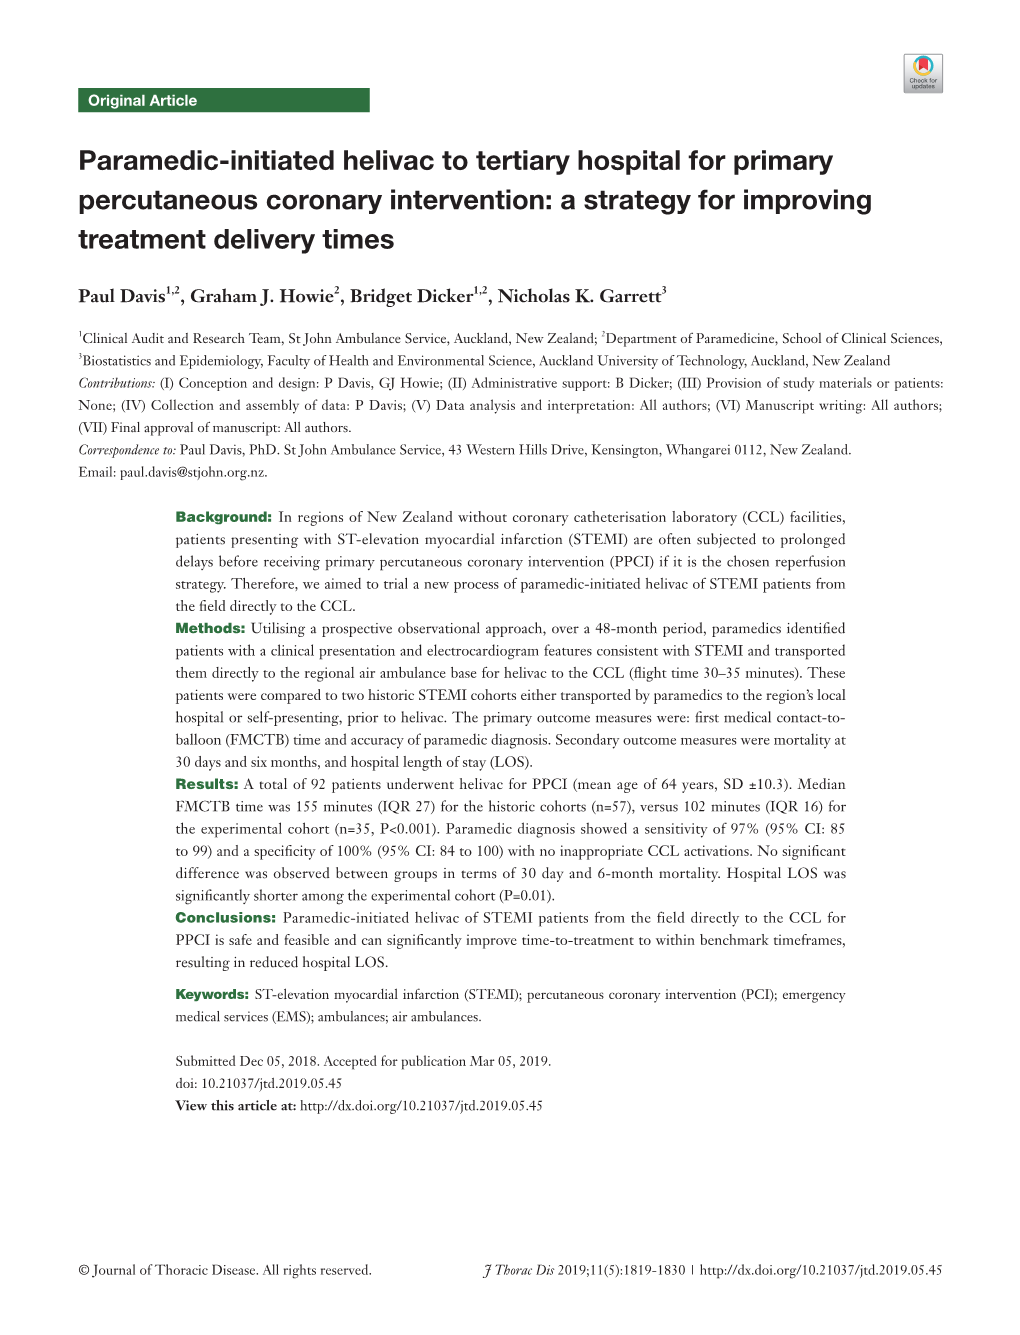 Paramedic-Initiated Helivac to Tertiary Hospital for Primary Percutaneous Coronary Intervention: a Strategy for Improving Treatment Delivery Times